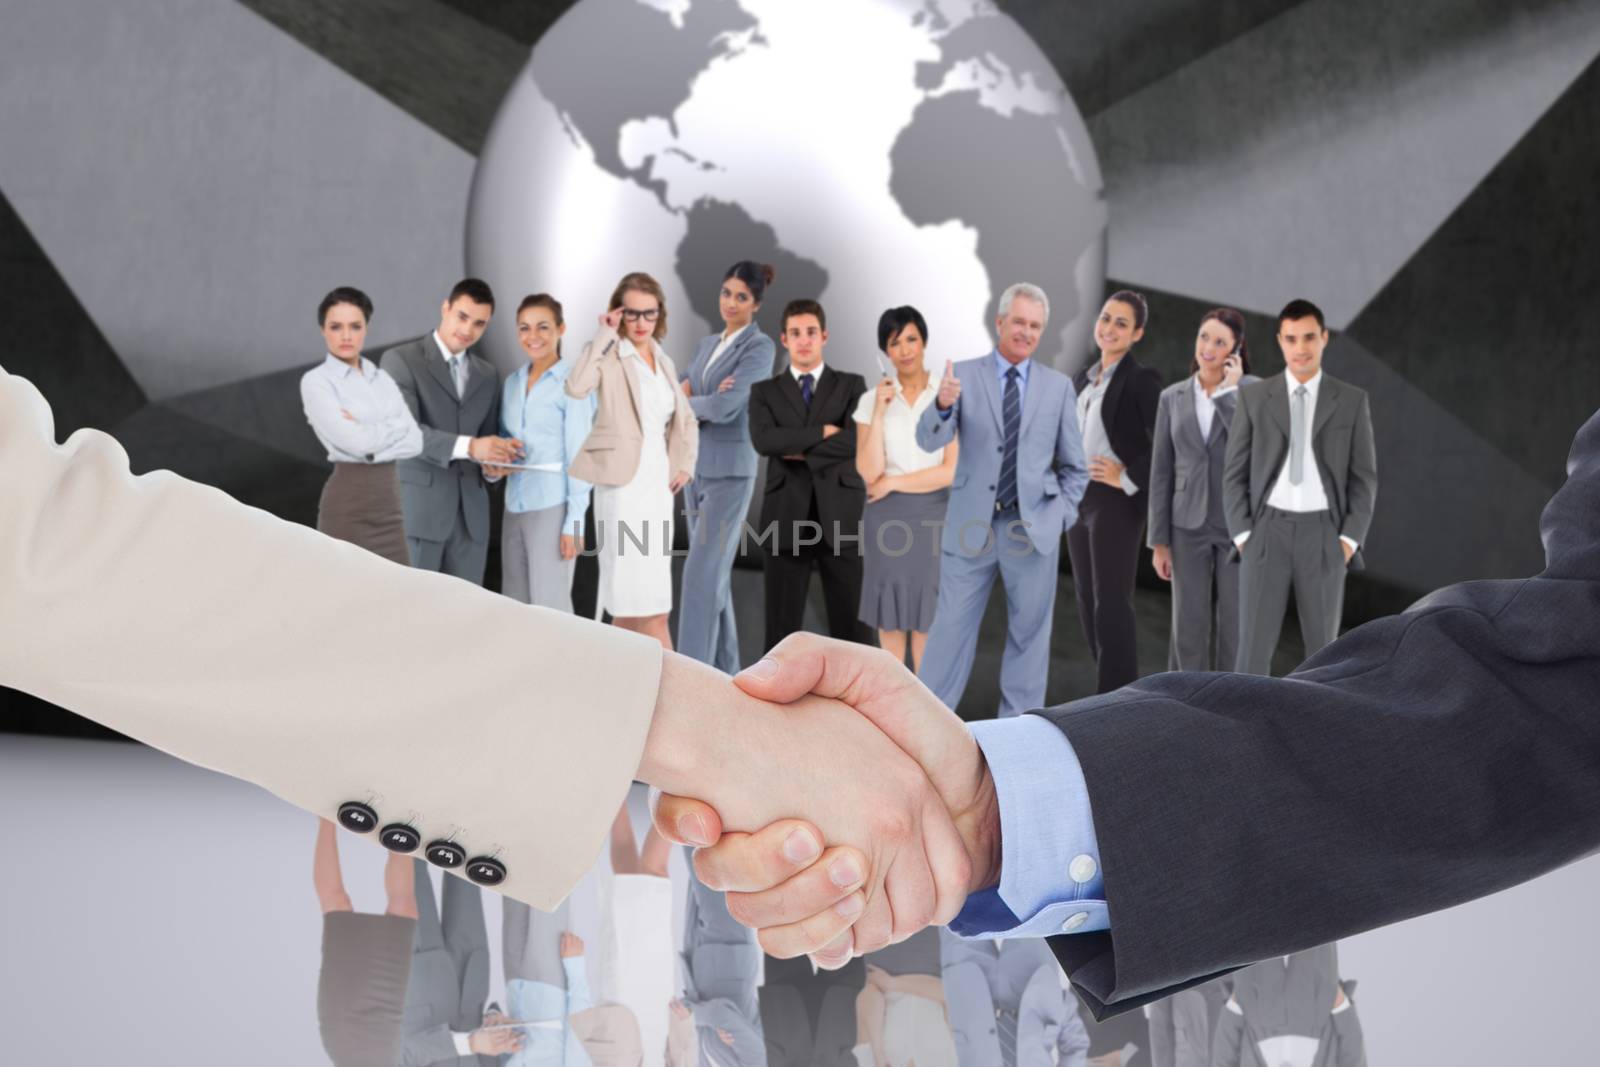 Smiling business people shaking hands while looking at the camera against planet on grey abstract background